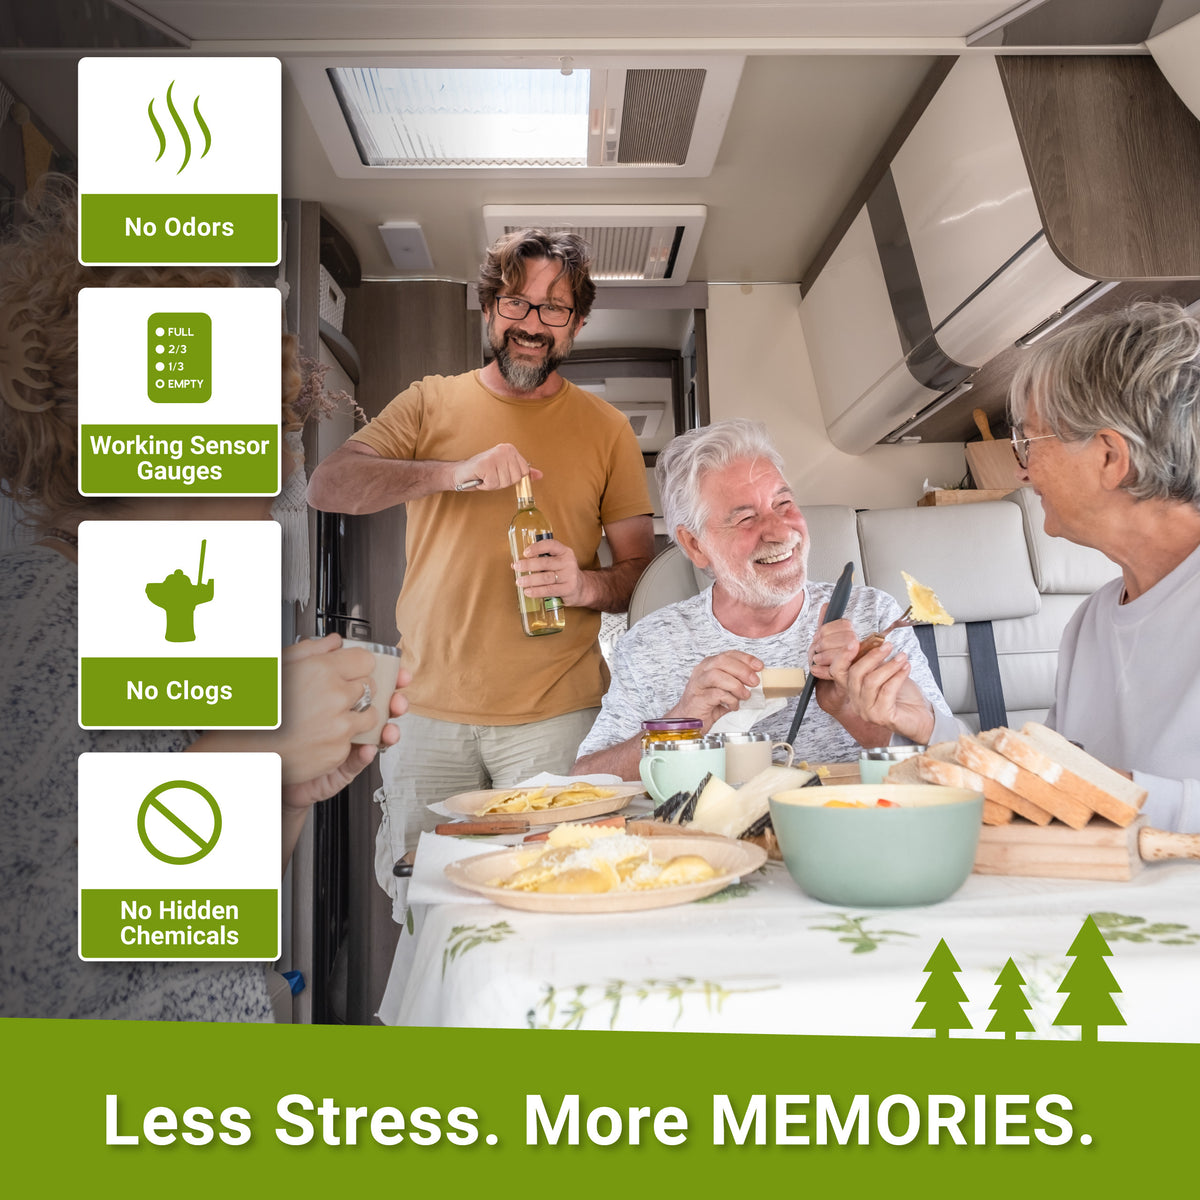 Less Stress More Memories when you use RV Digest-It. Unique Camping + Marine